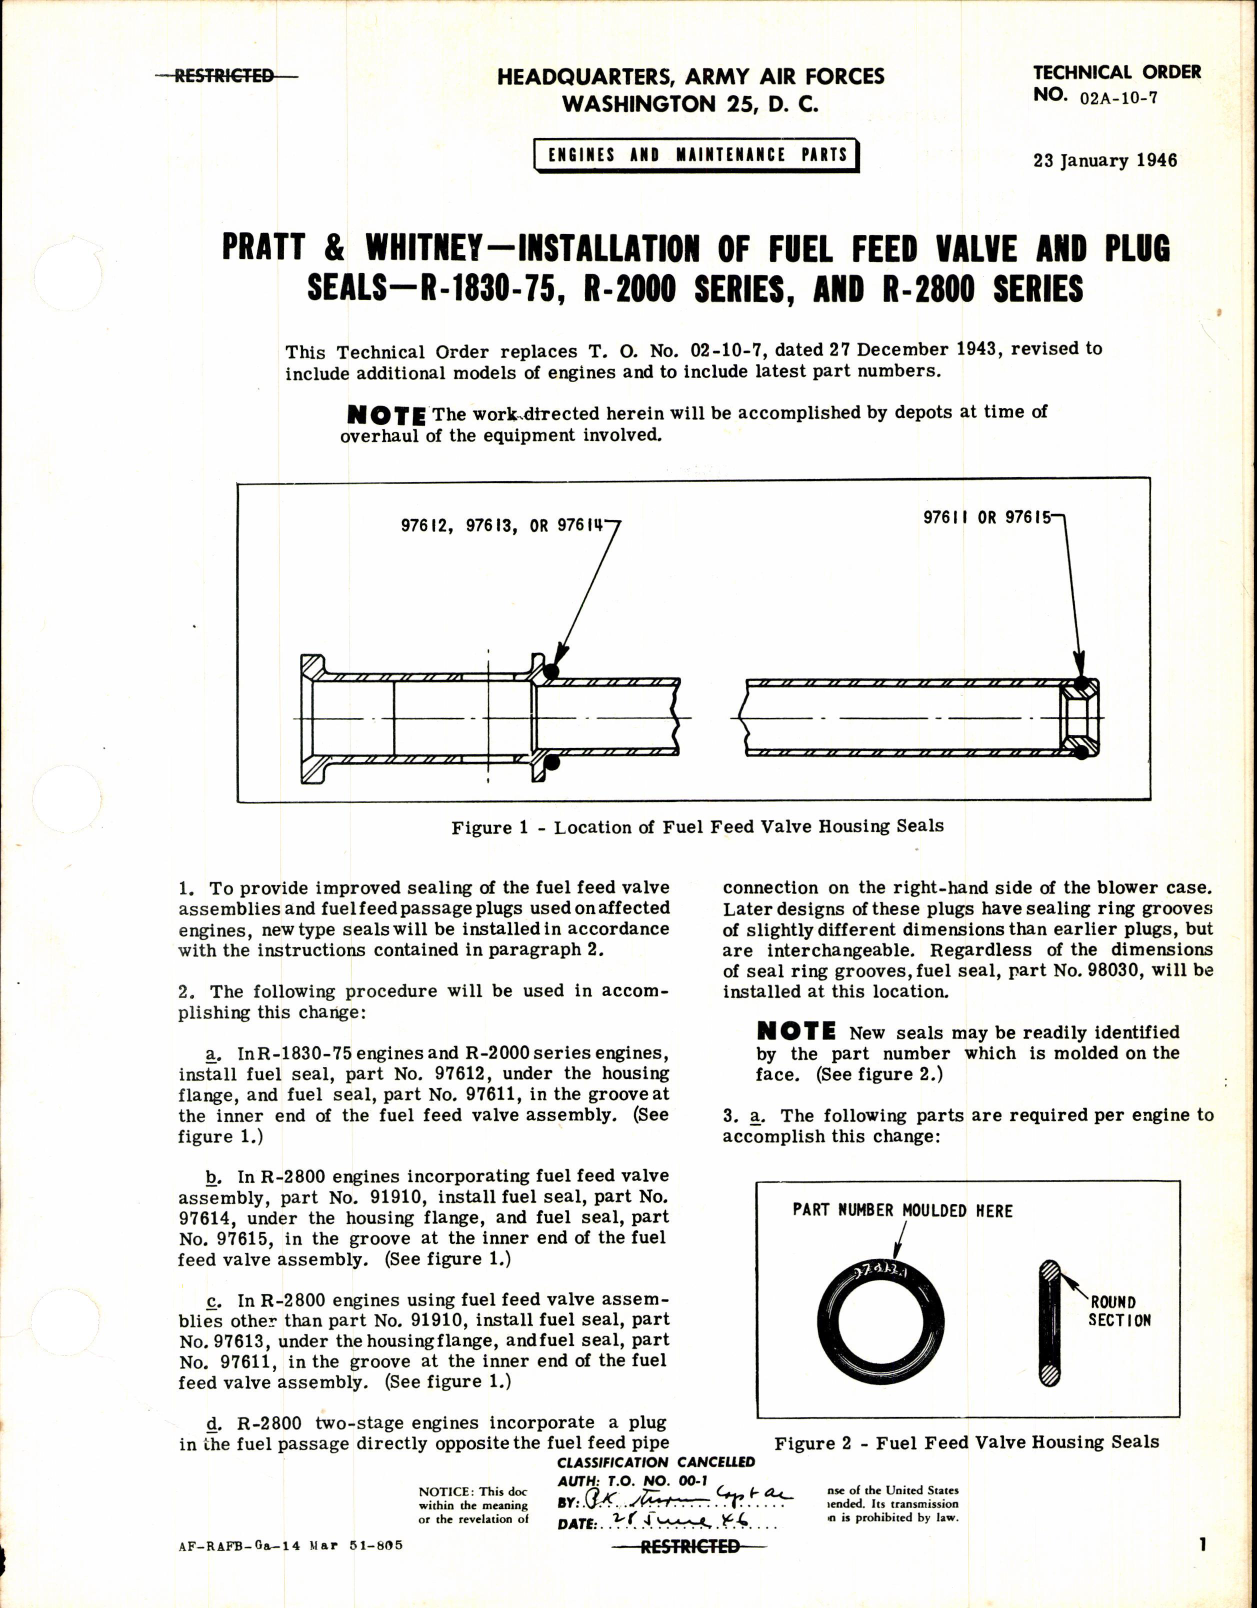 Sample page 1 from AirCorps Library document: Installation of Fuel Feed Valve and Plug Seals